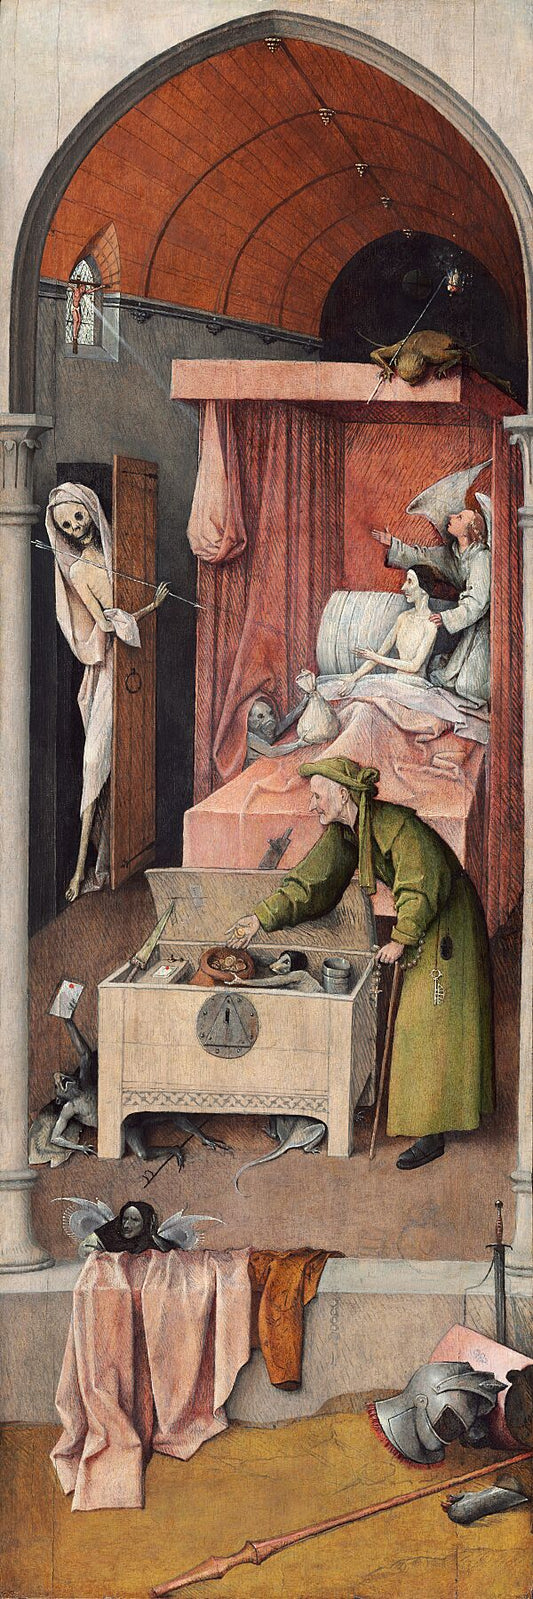 Hieronymus Bosch : Death and the Miser - c. 1485/1490